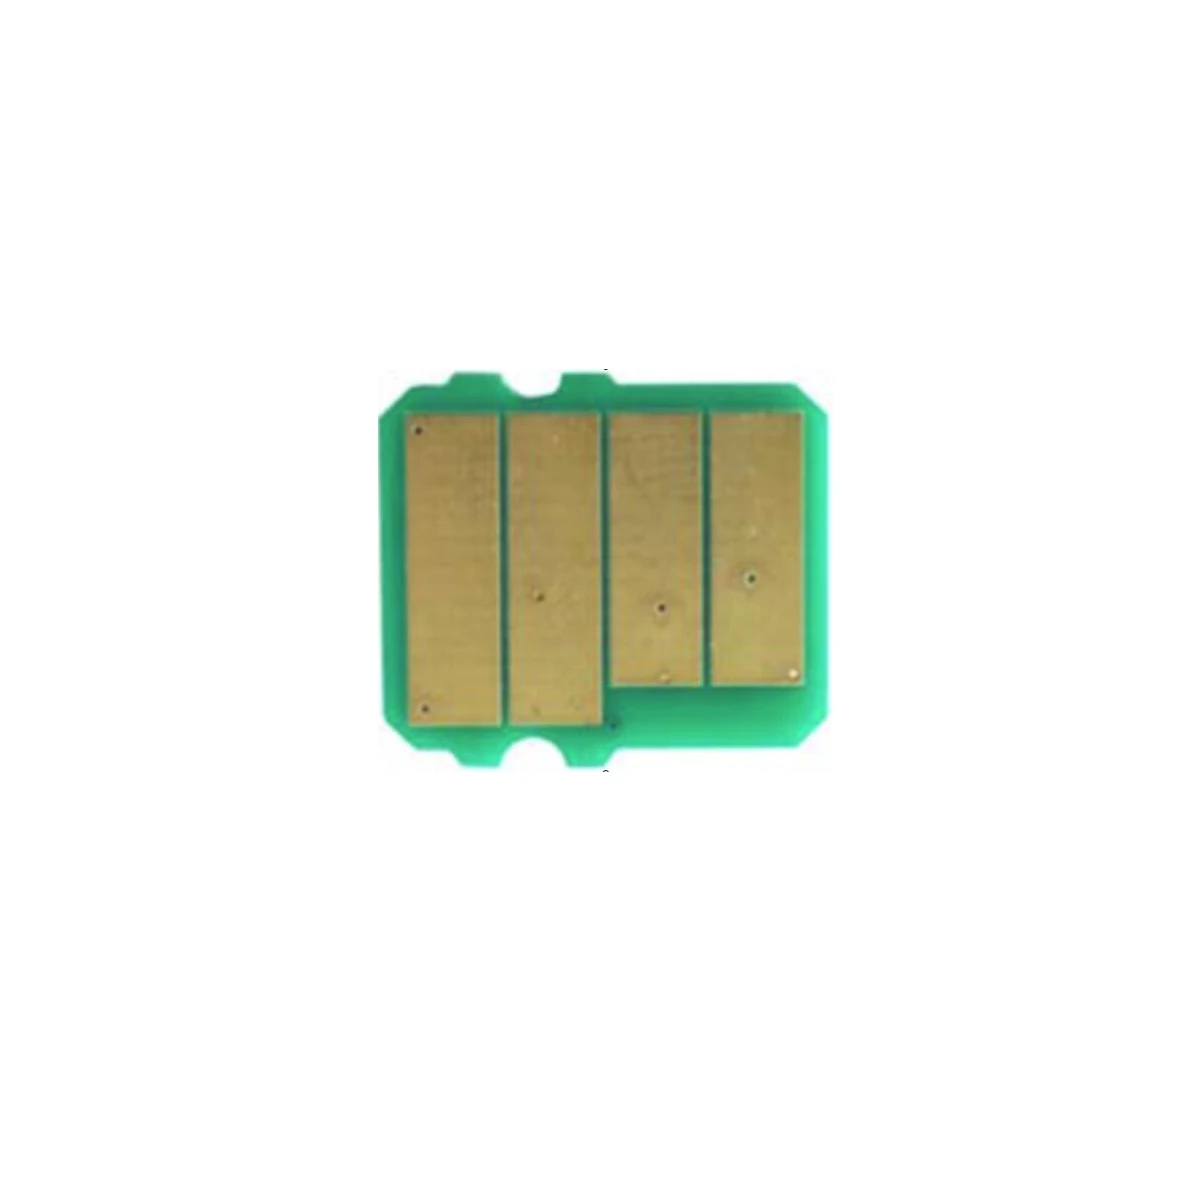 Compatible Tn2410 2420 Chip For Brother Hl-l2350dw Hl-l2370dn Dcp L2530dw Dcp L2550dn Printer Chip - Buy Toner Brother Tn243,For Brother Tn247 Product on Alibaba.com